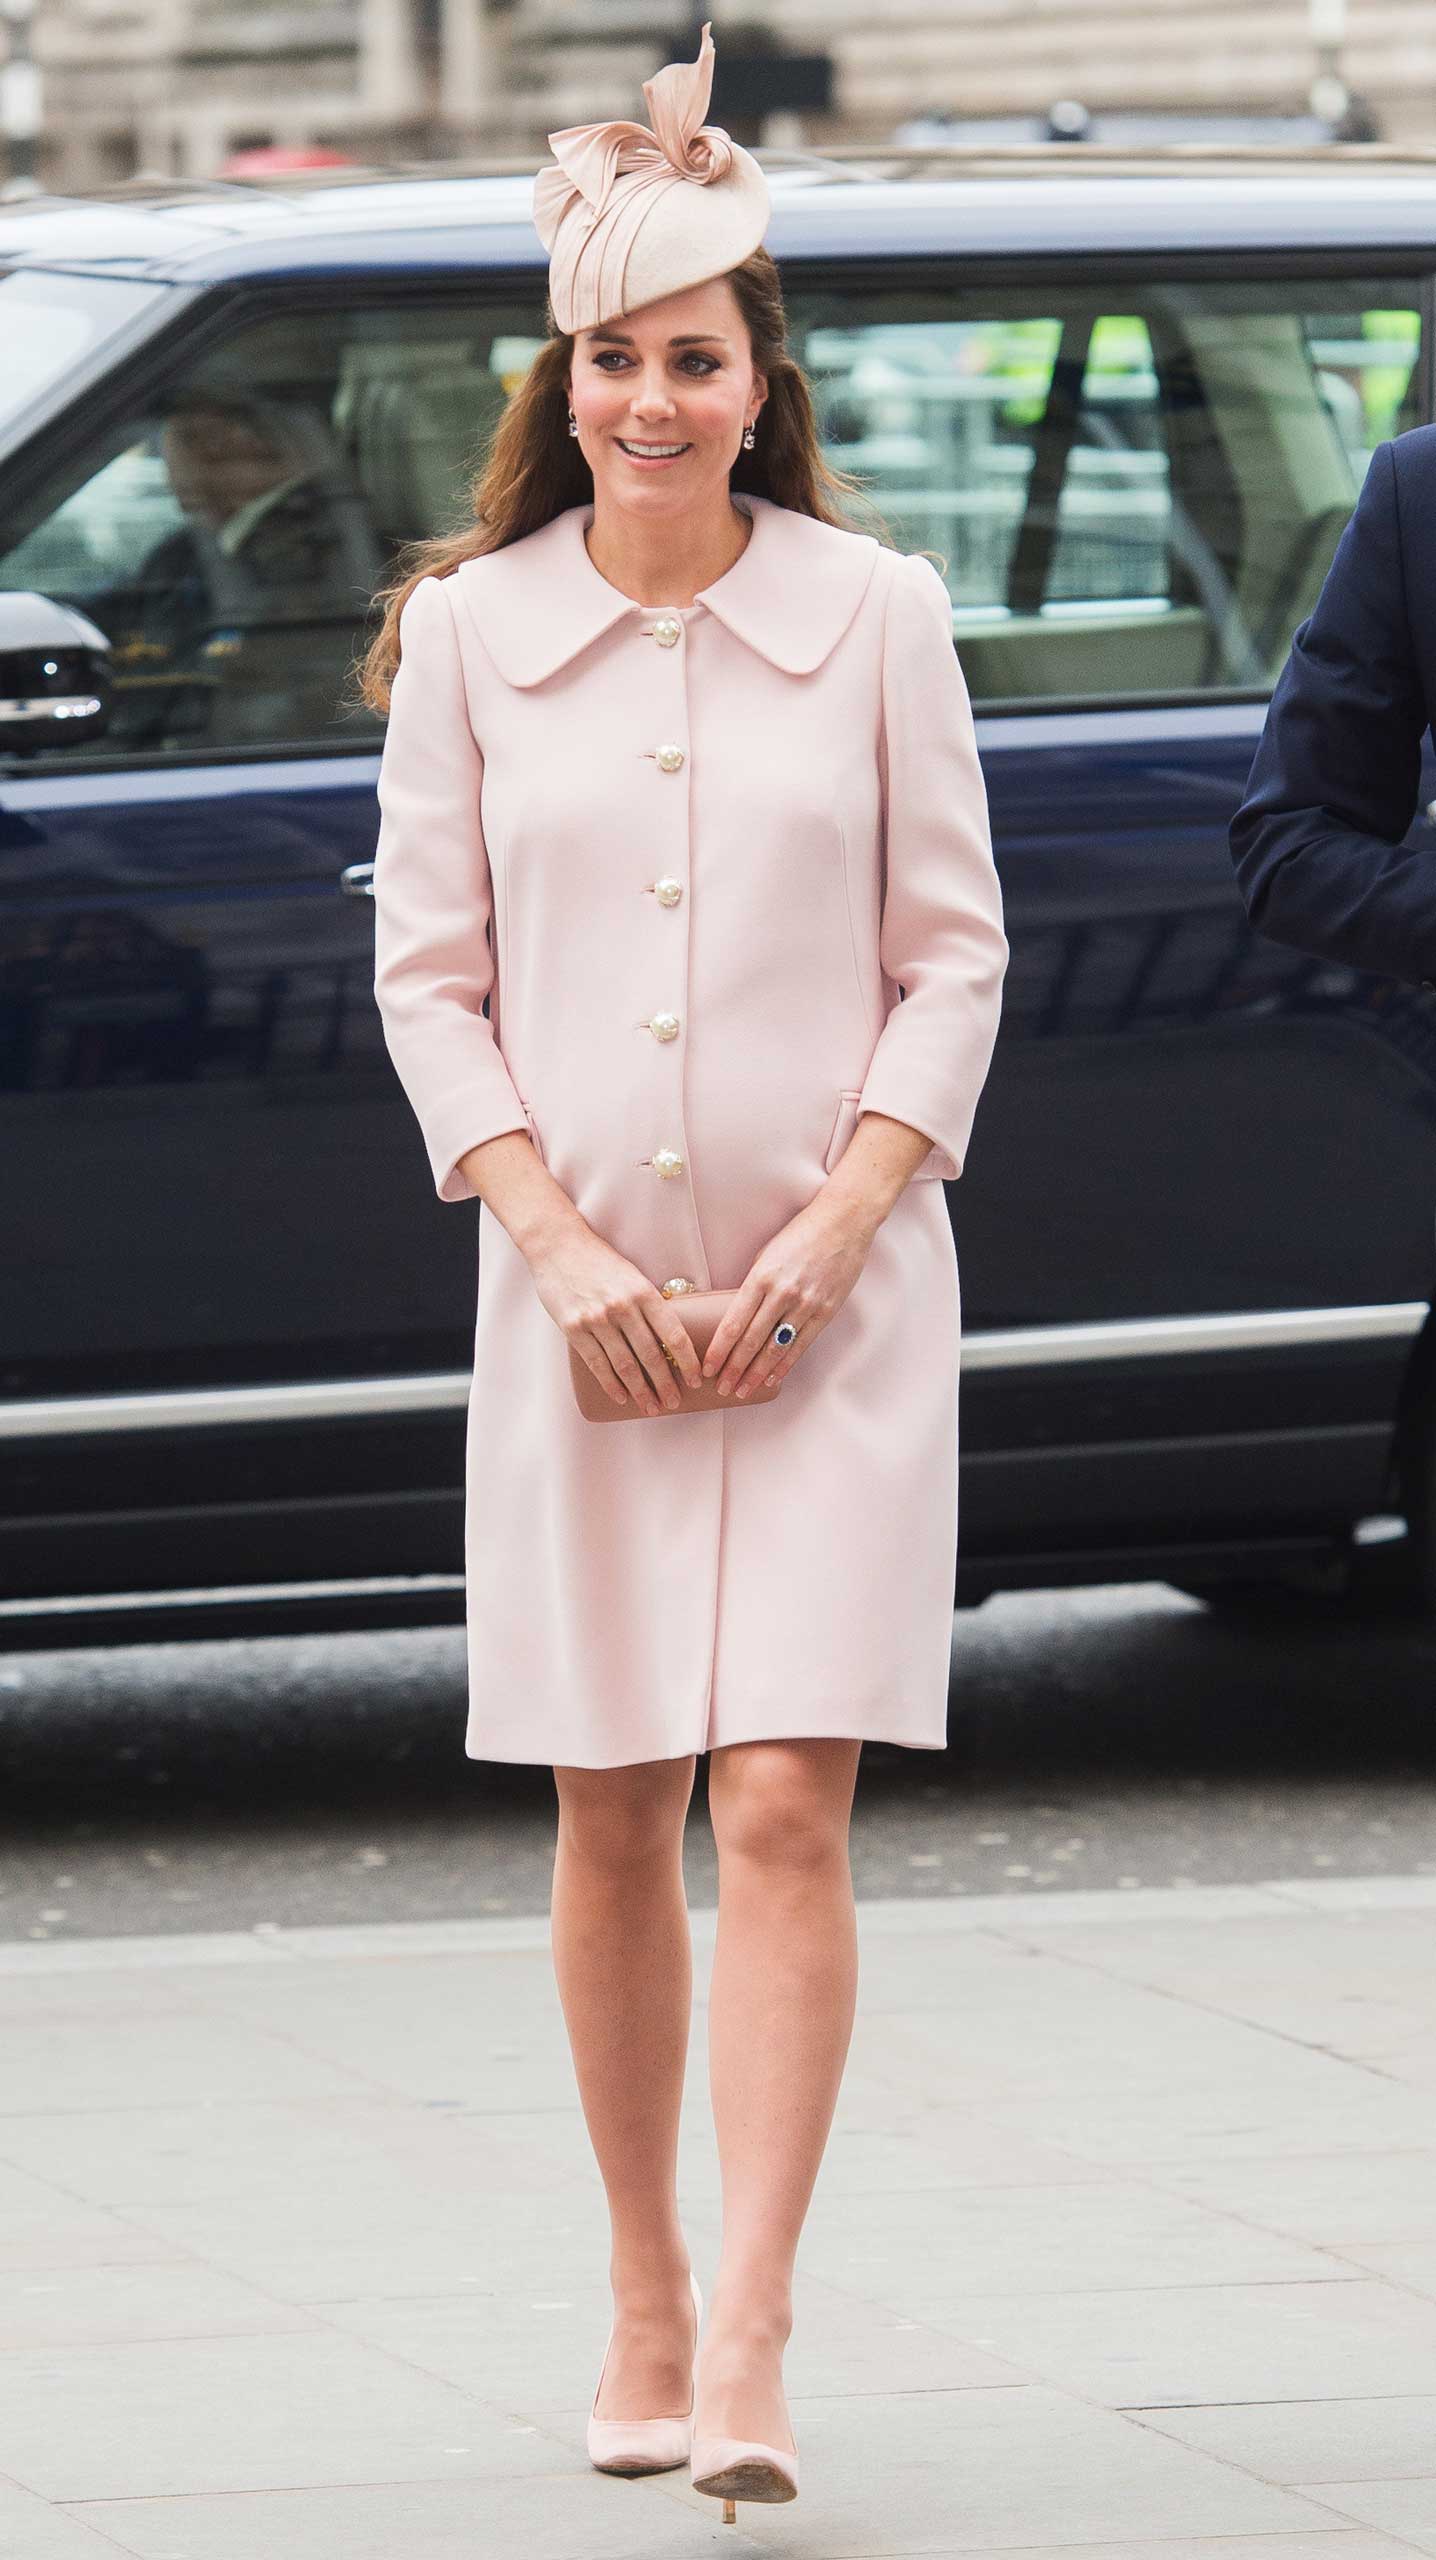 Catherine, Duchess of Cambridge attends the Commonwealth Service at Westminster Abbey on March 9, 2015 in London.